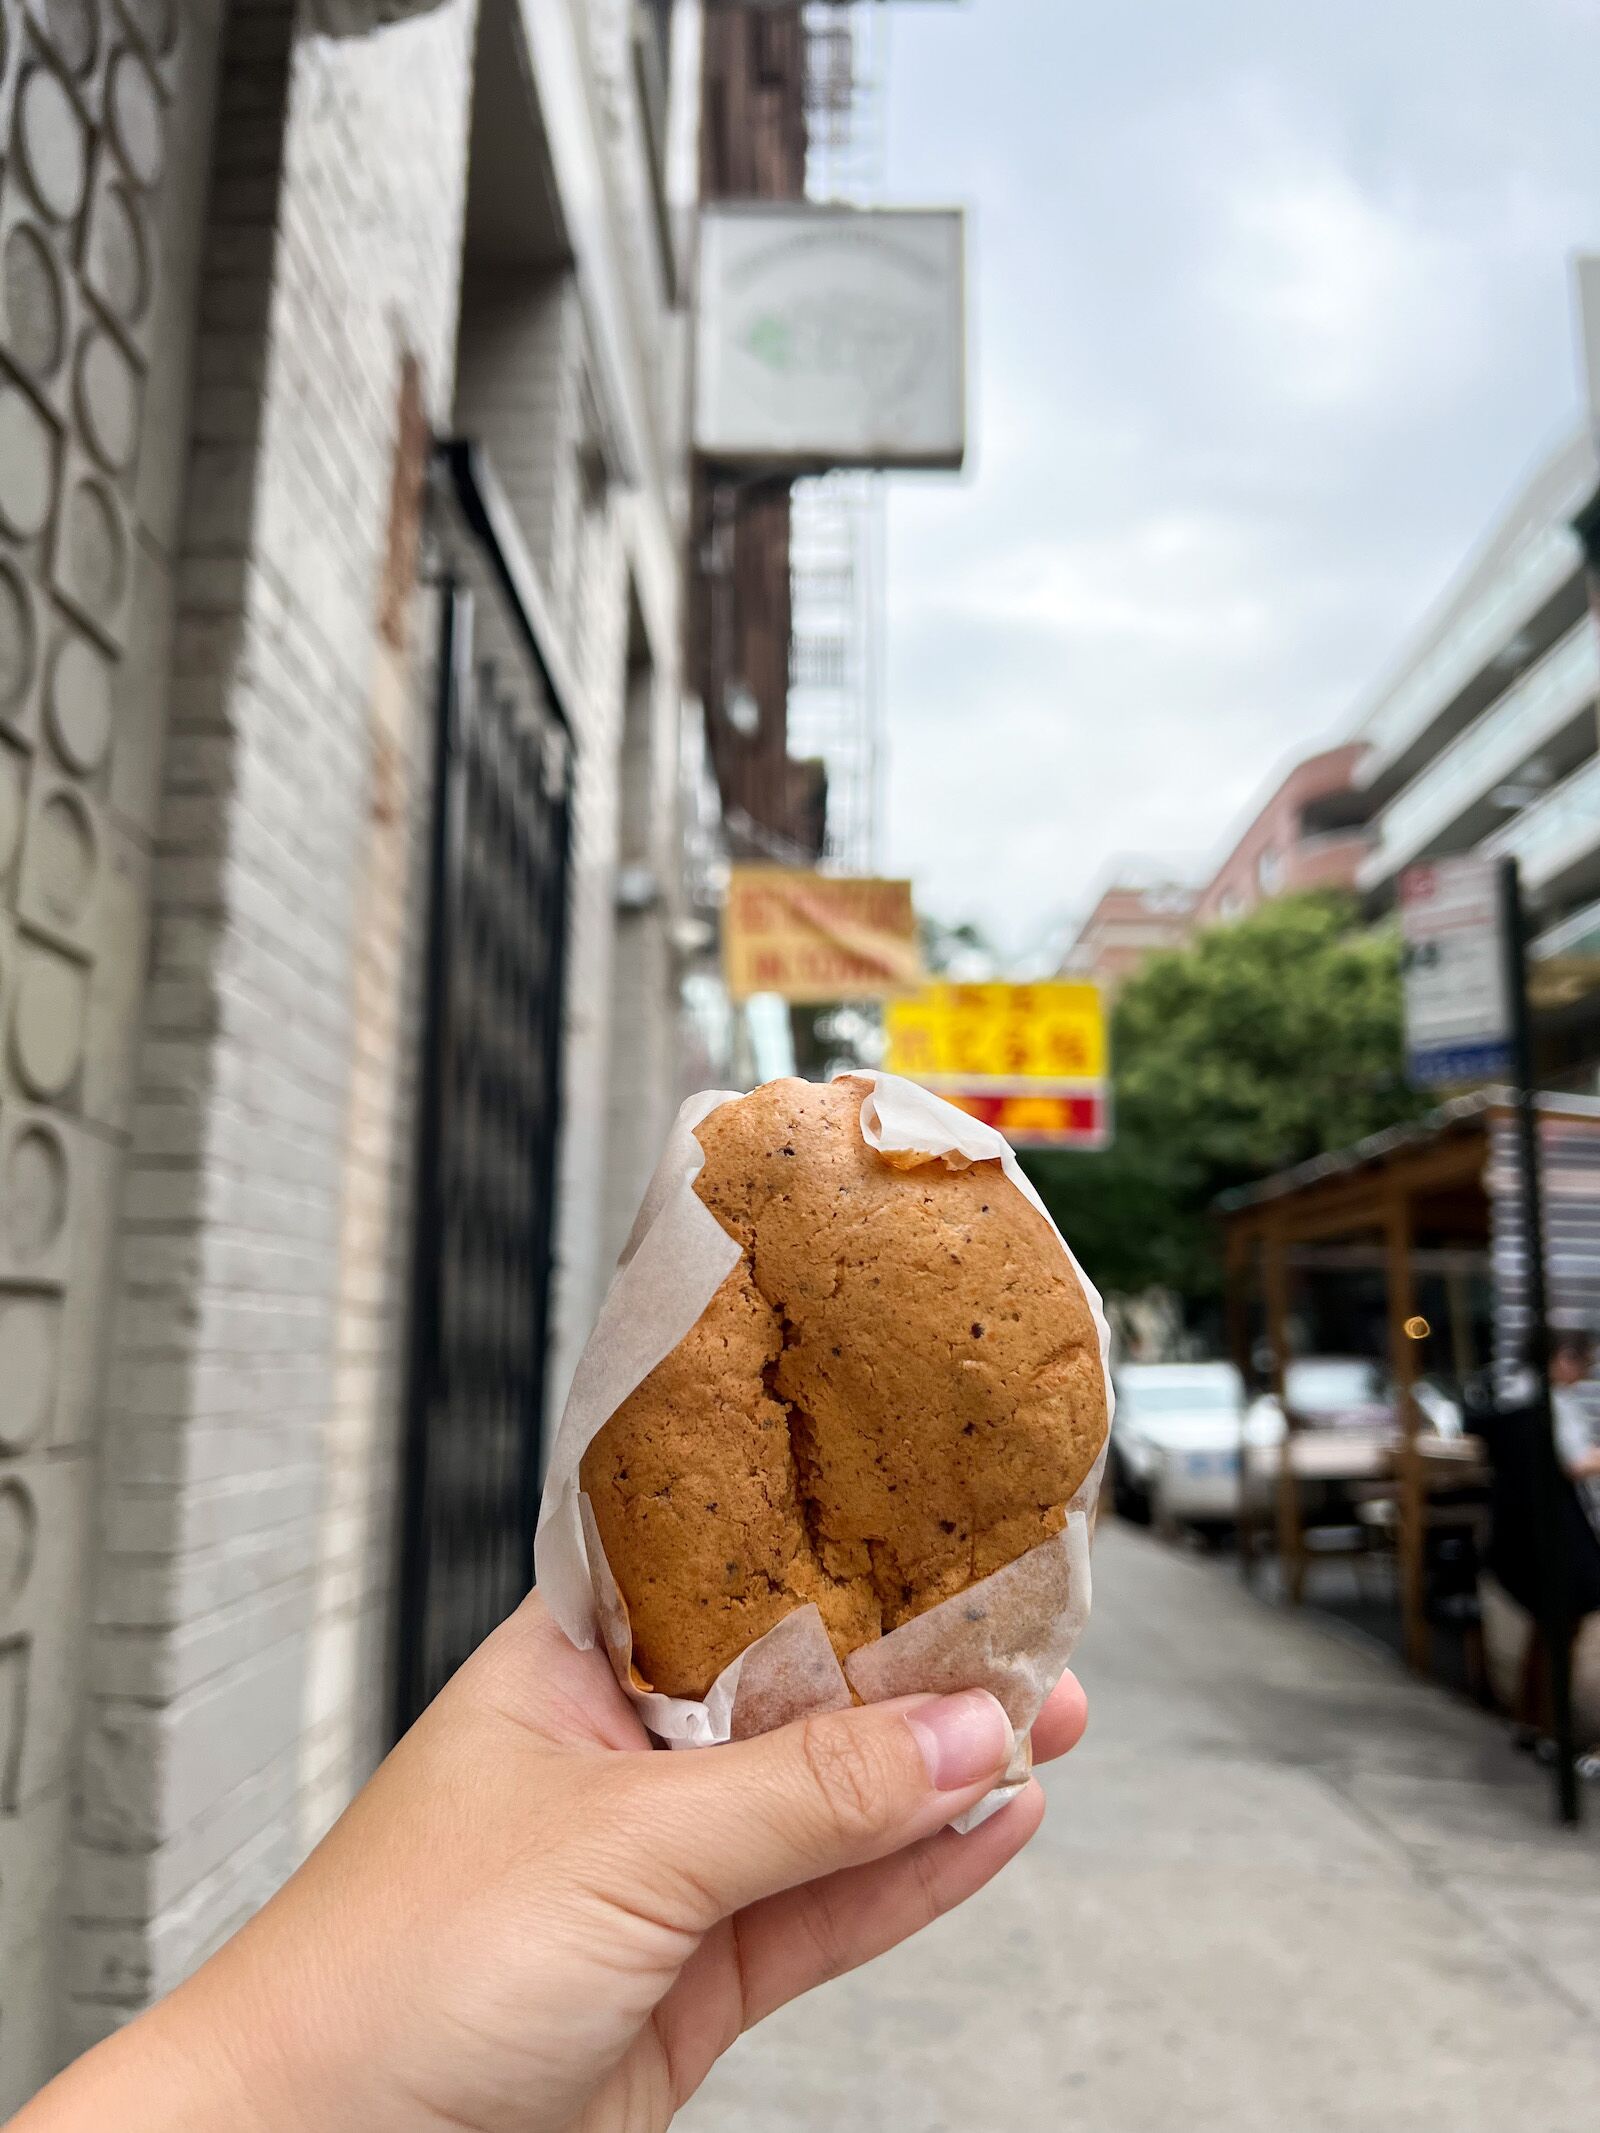 A woman's hand holds a sponge cake wrapped in paper from NYC Chinatown neighborhood bakery Kam Hing